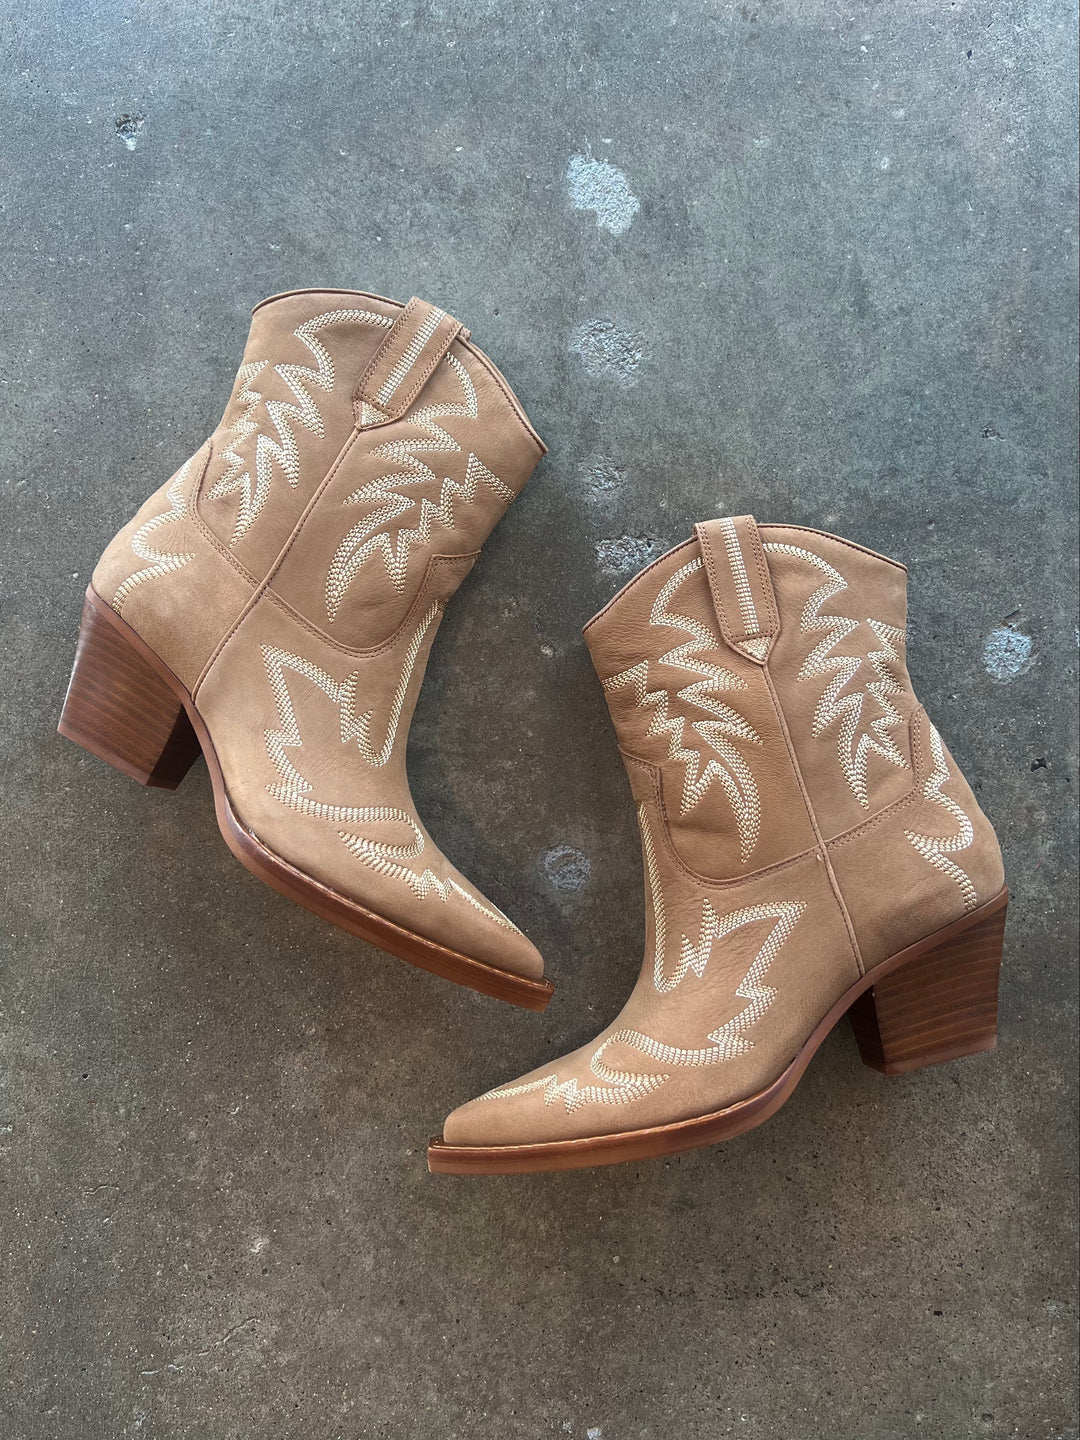 Runa Boot, Shoes, Dolce Vita Footwear, Adeline, dallas boutique, dallas texas, texas boutique, women's boutique dallas, adeline boutique, dallas boutique, trendy boutique, affordable boutique